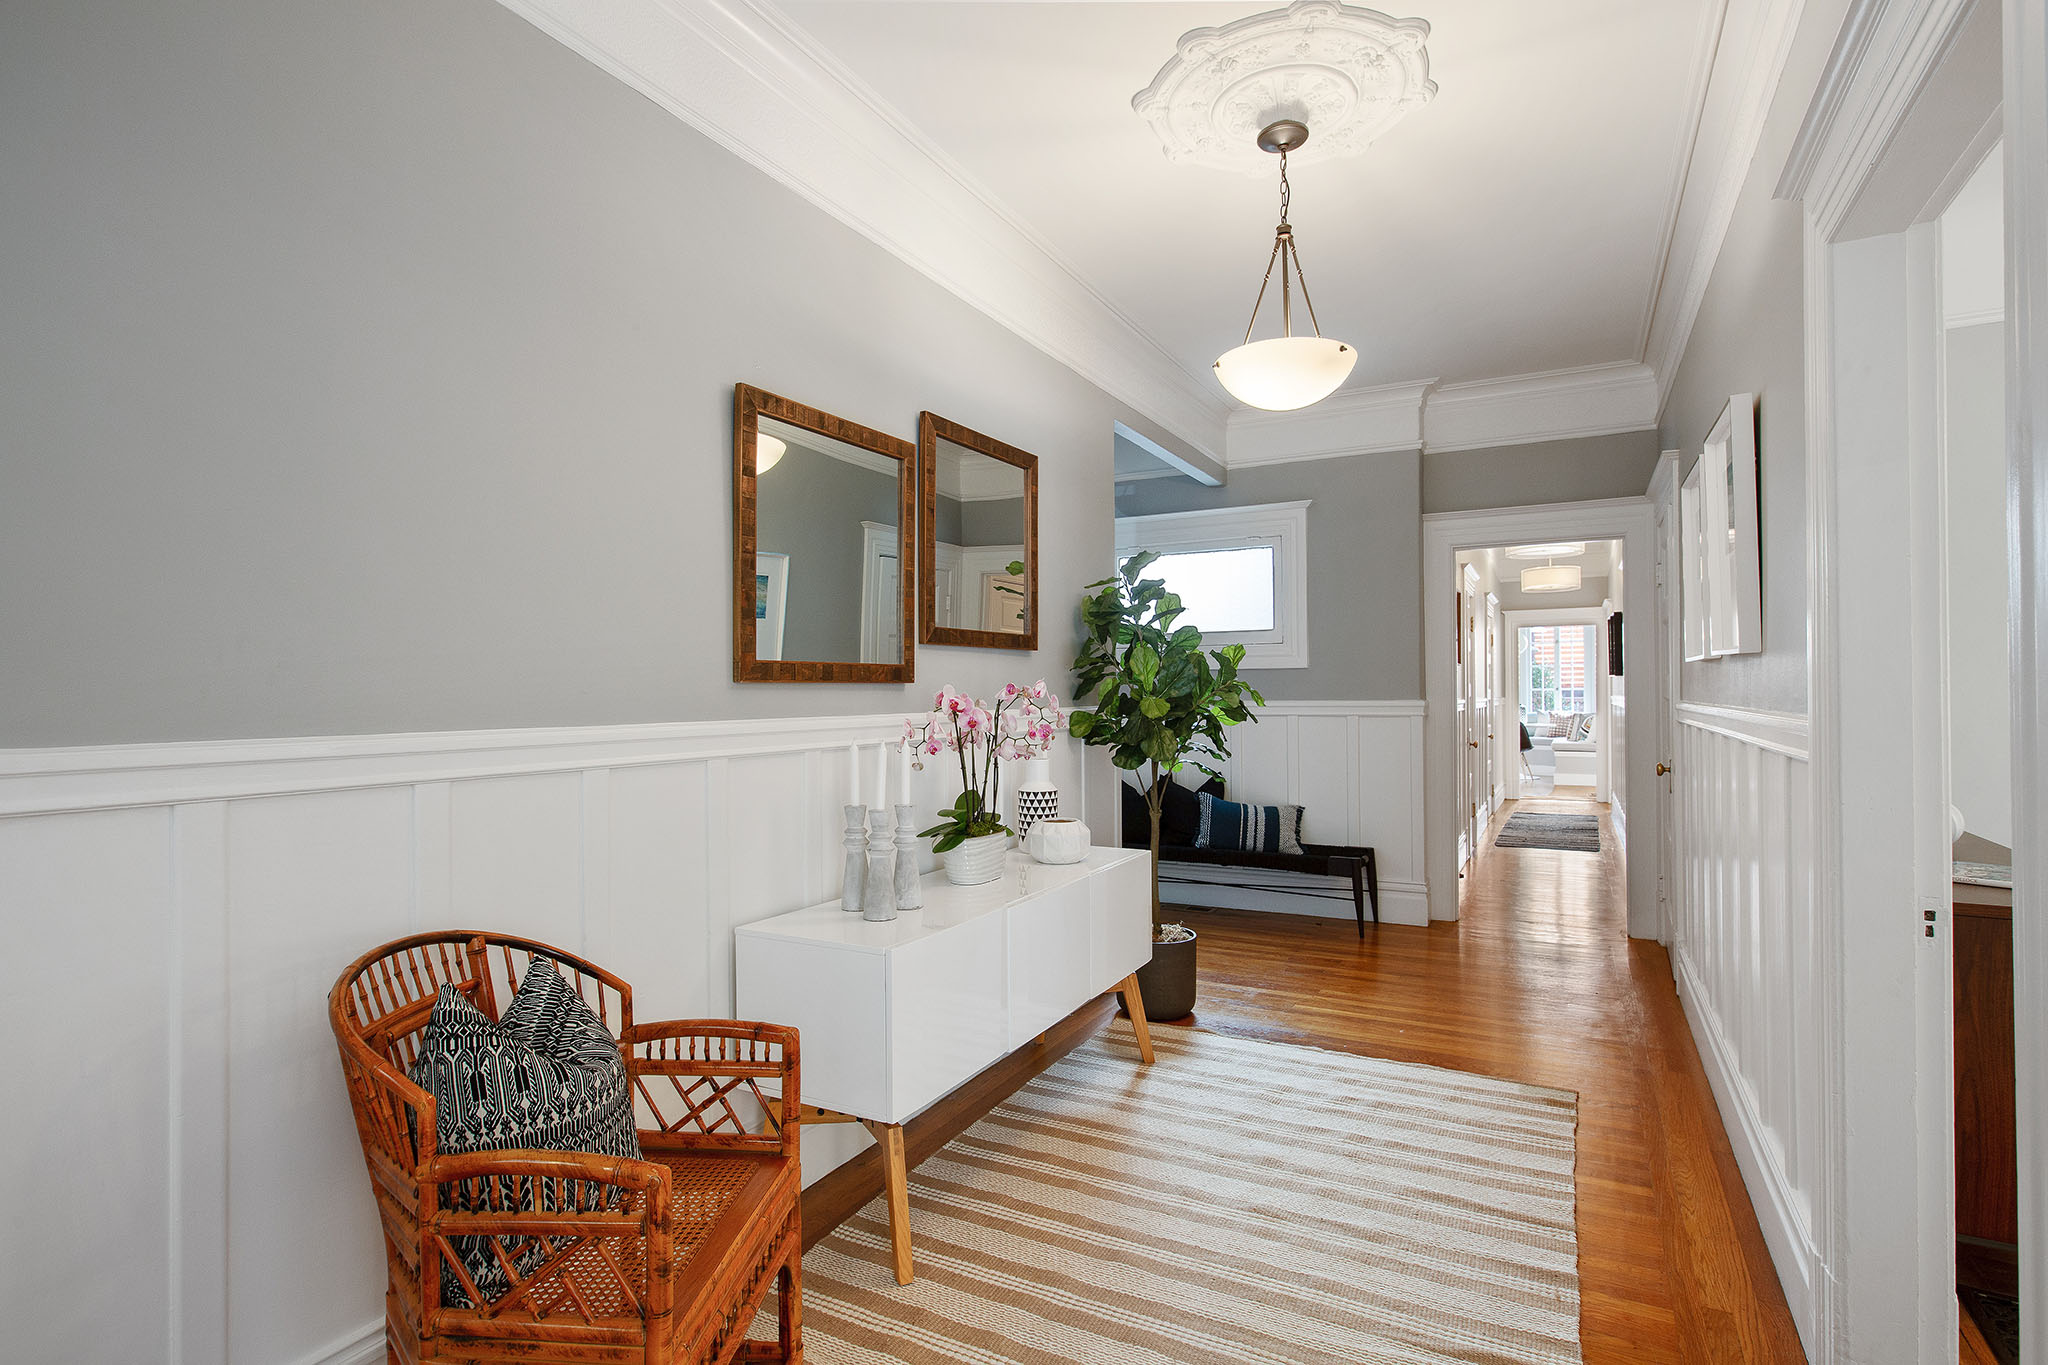 Property Photo: View of the hallway, showing wood floors and white wainscoting